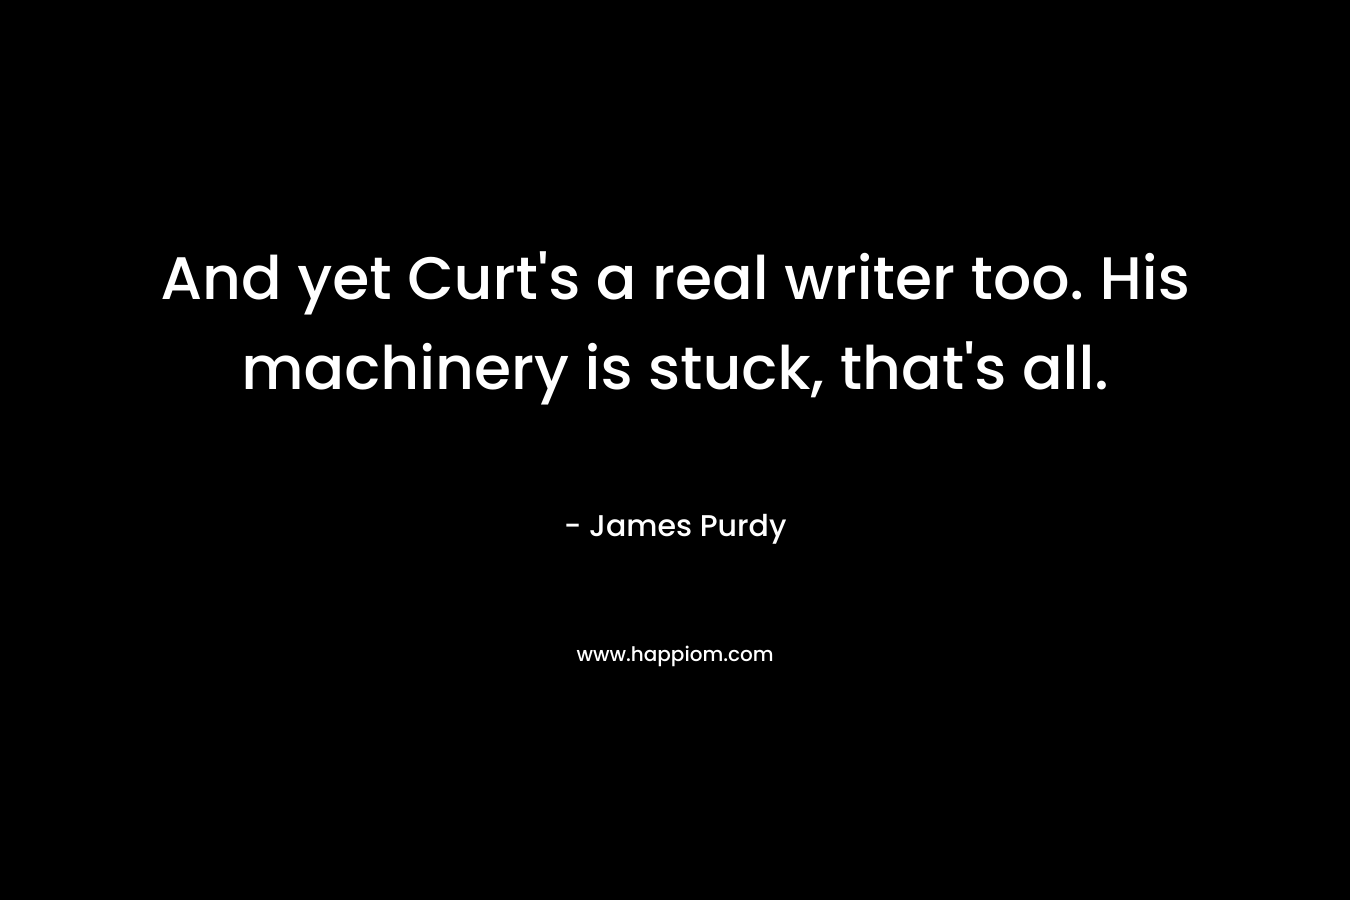 And yet Curt's a real writer too. His machinery is stuck, that's all.